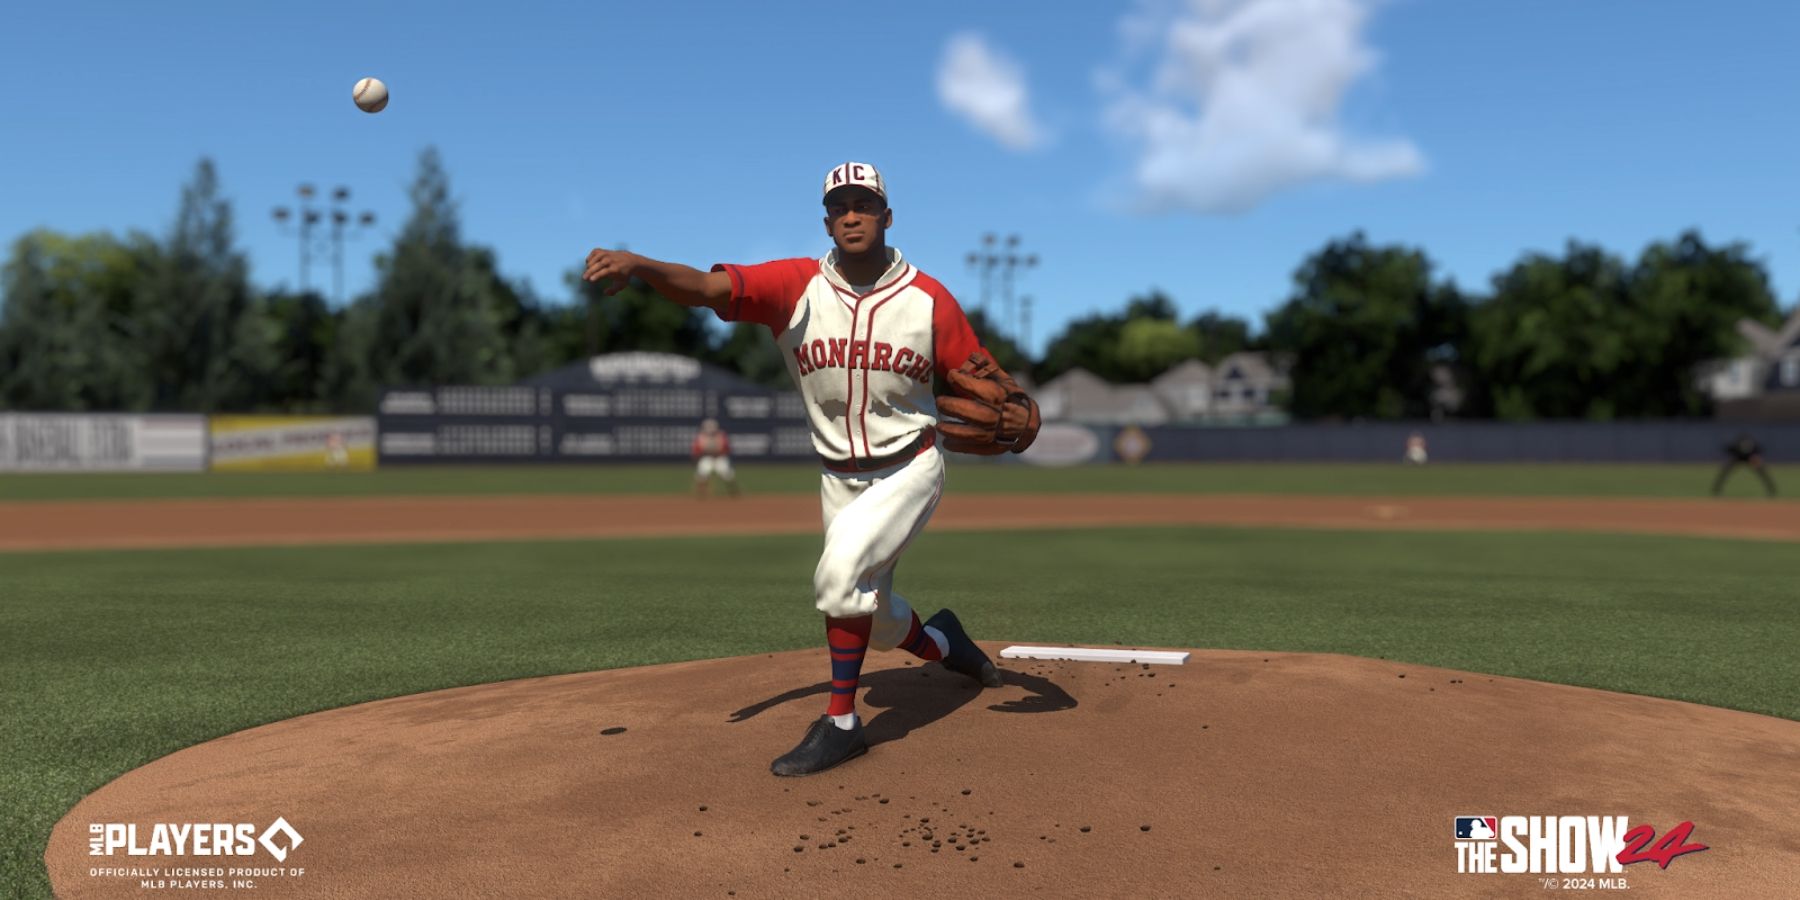 Pitcher throwing a baseball in MLB The Show 24